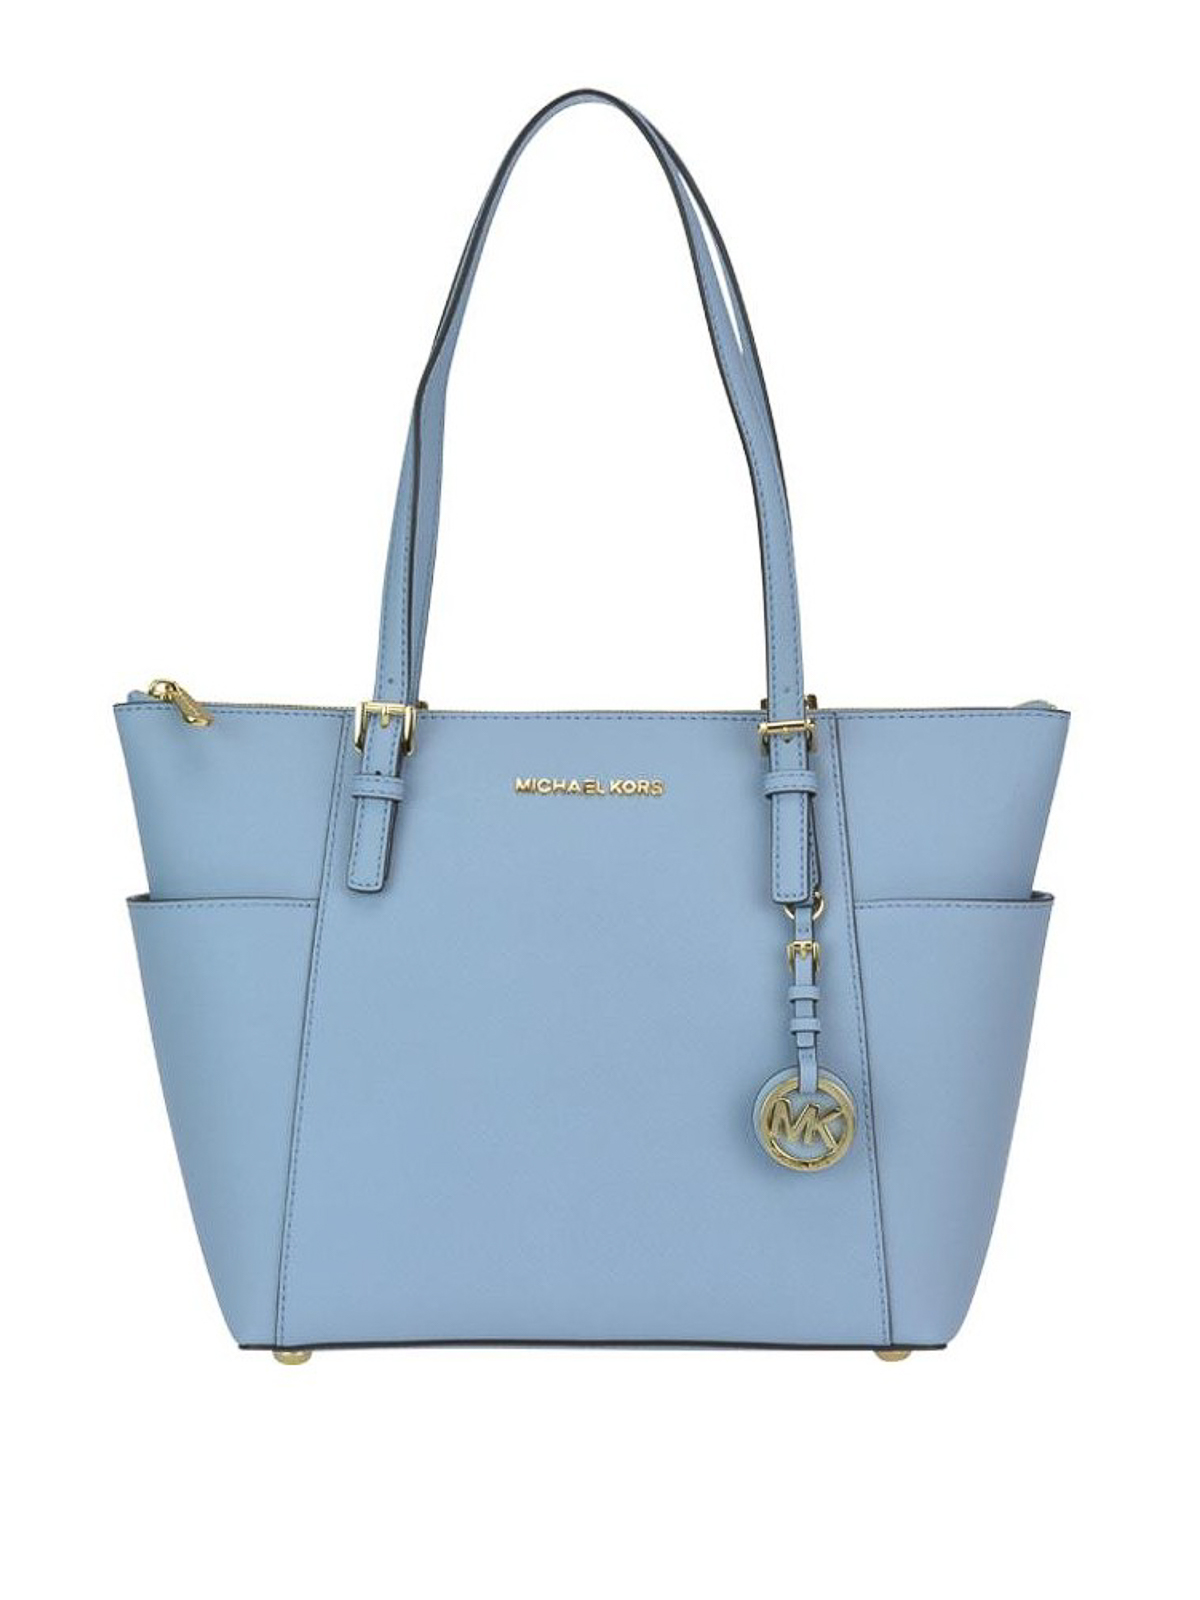 Michael Kors Pale Blue Saffiano Leather Multifunction Travel Tote